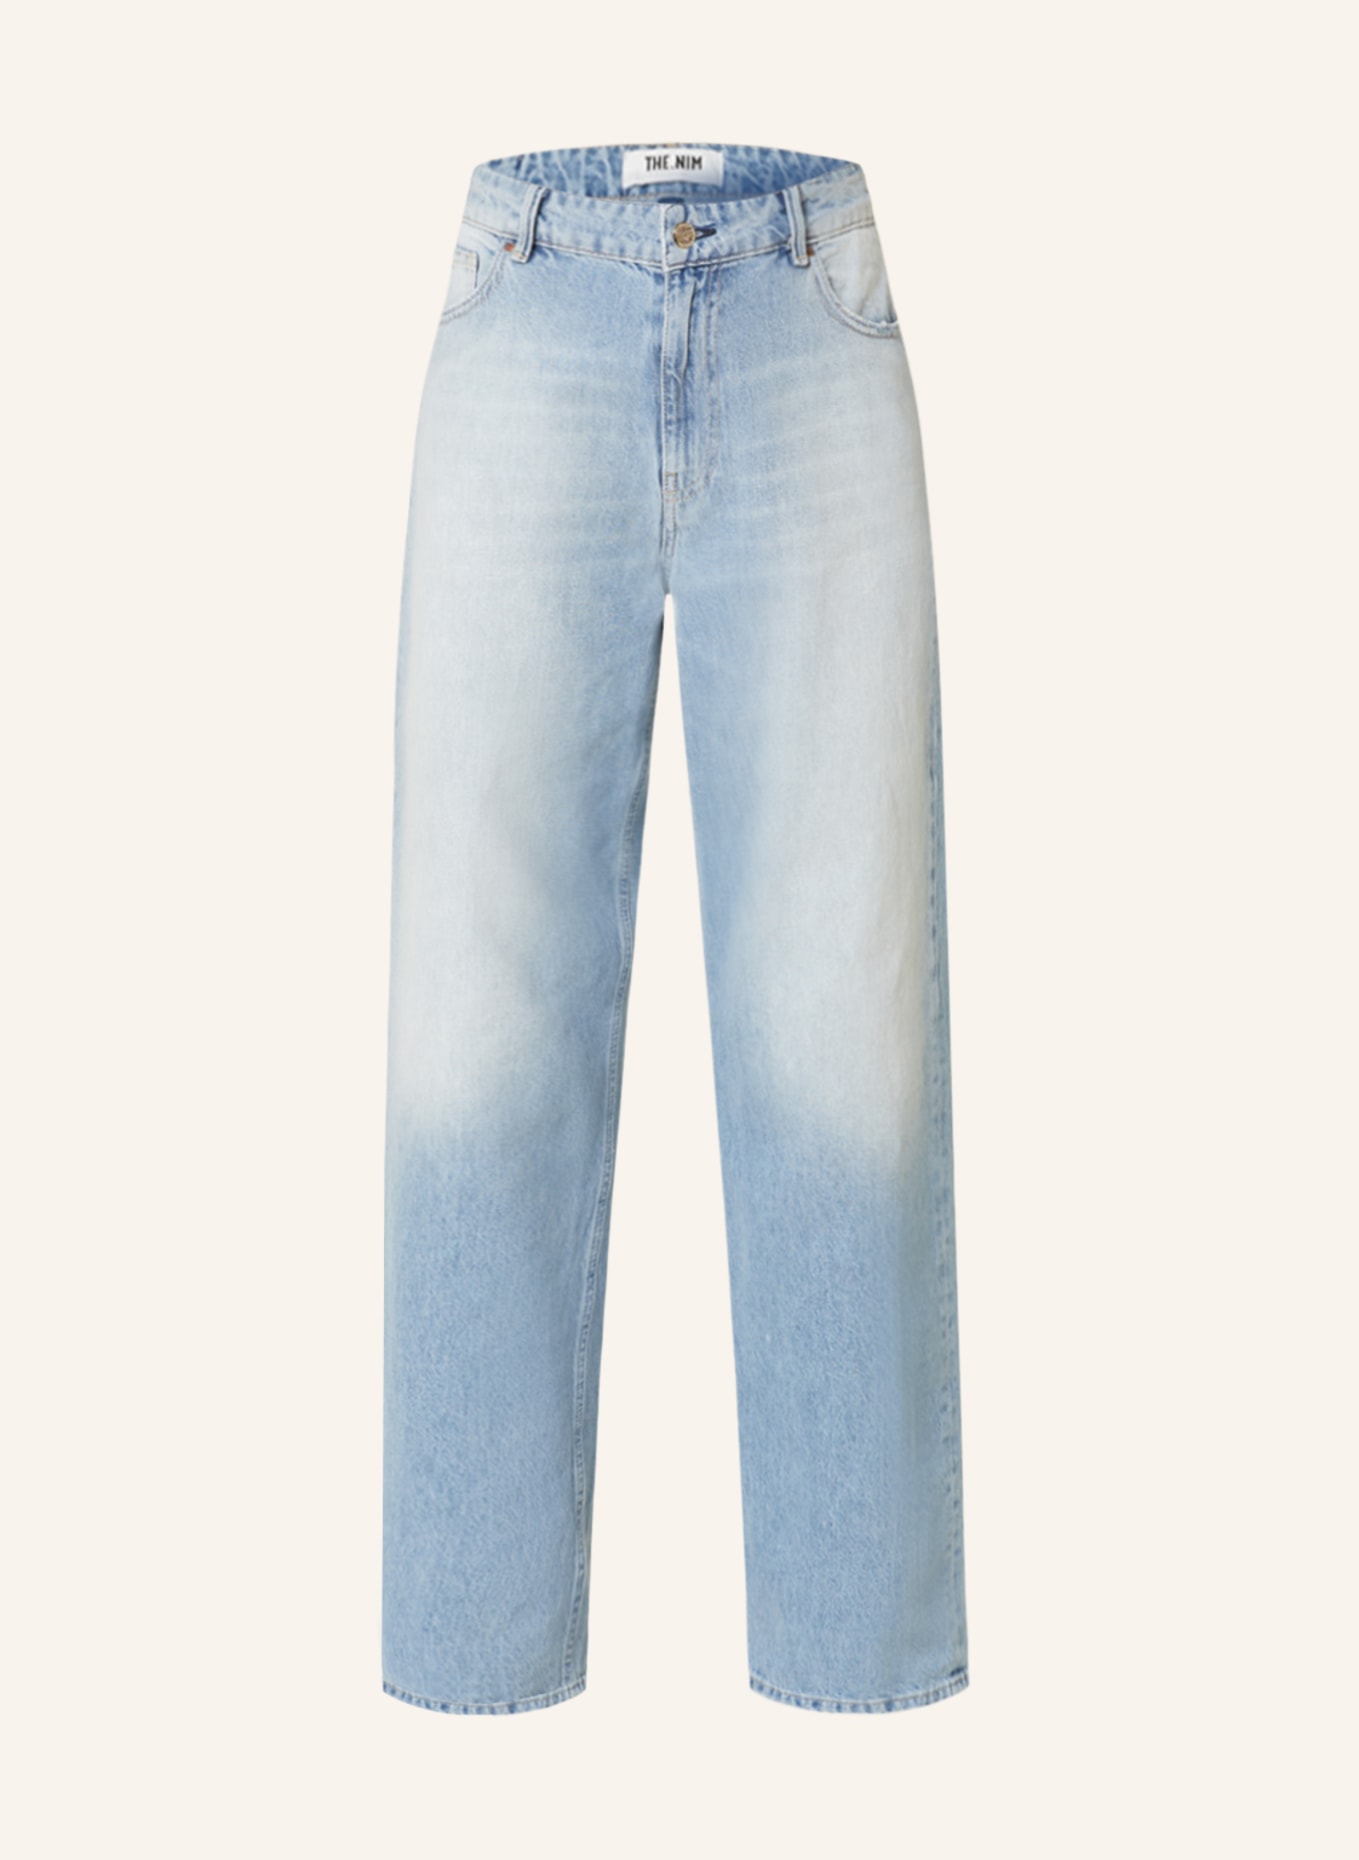 THE.NIM STANDARD Straight jeans EMMA, Color: W725-LSW LIGHT STONE WASHED (Image 1)